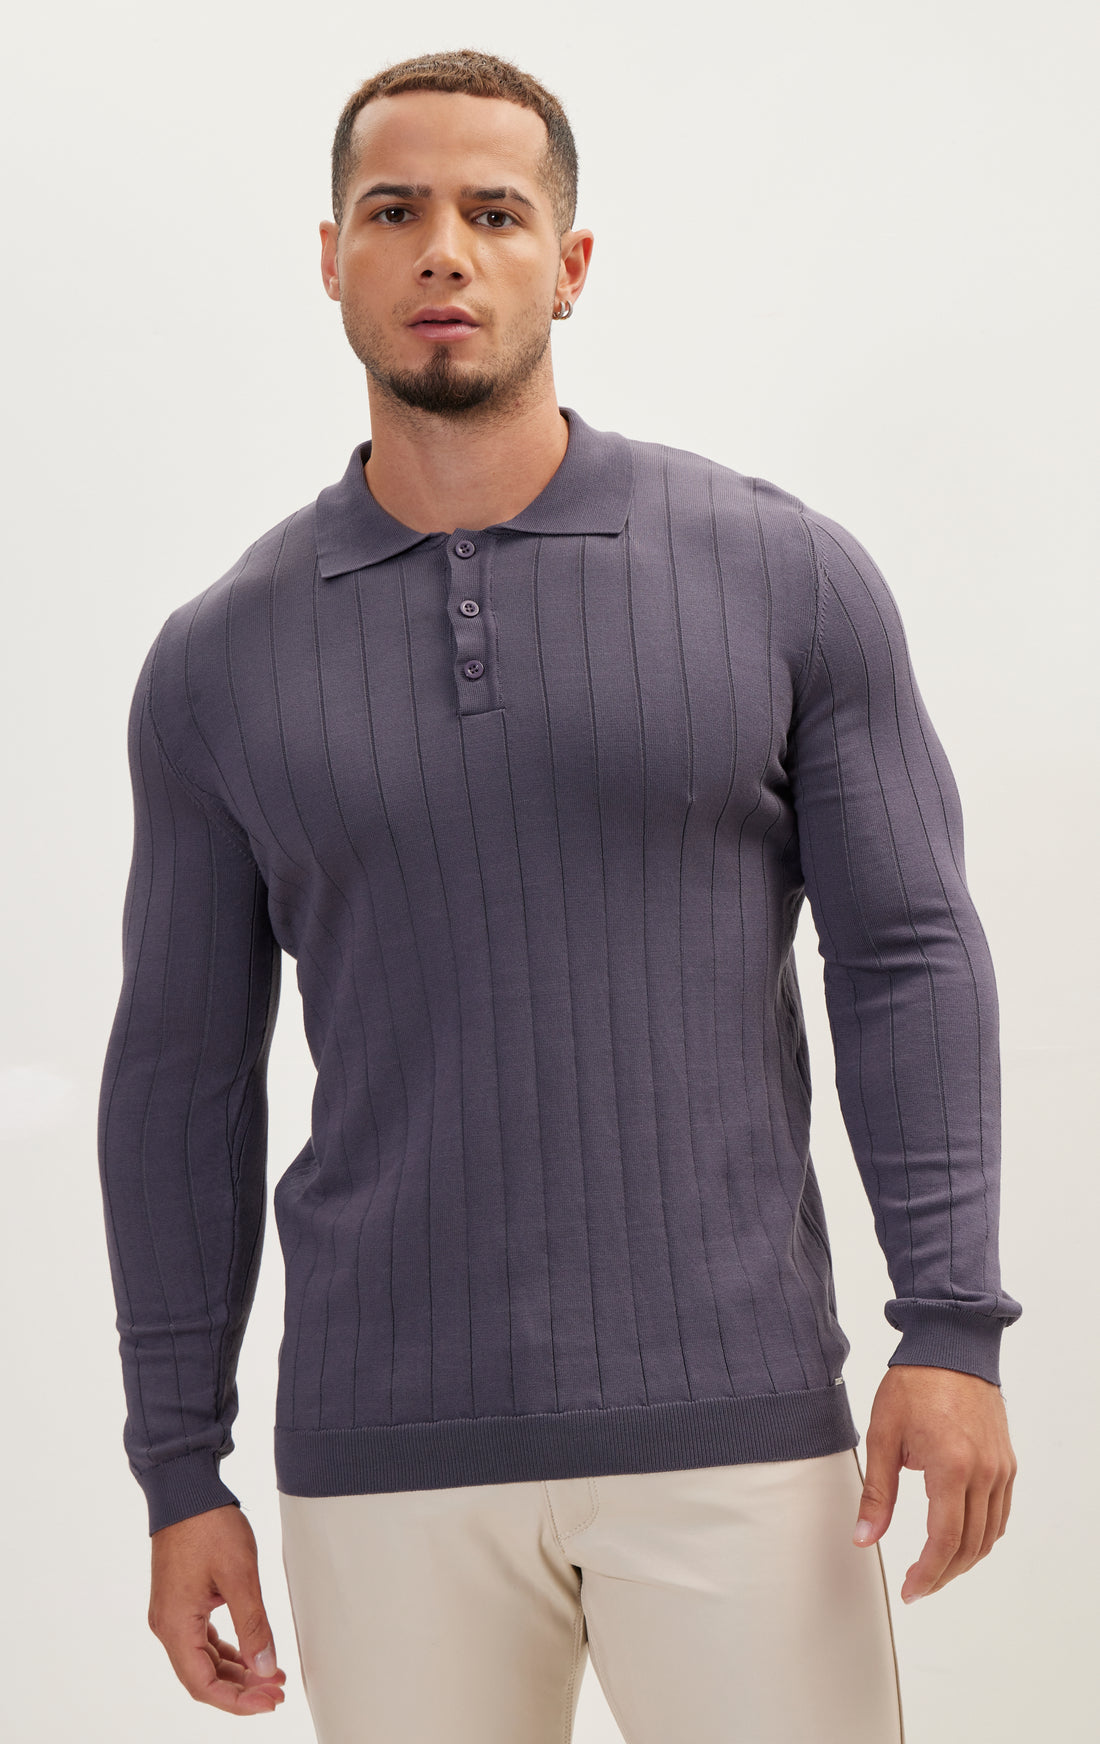 N° 6462 Slip-Stitch polo NECK long sleeve SWEATER - Anthracite